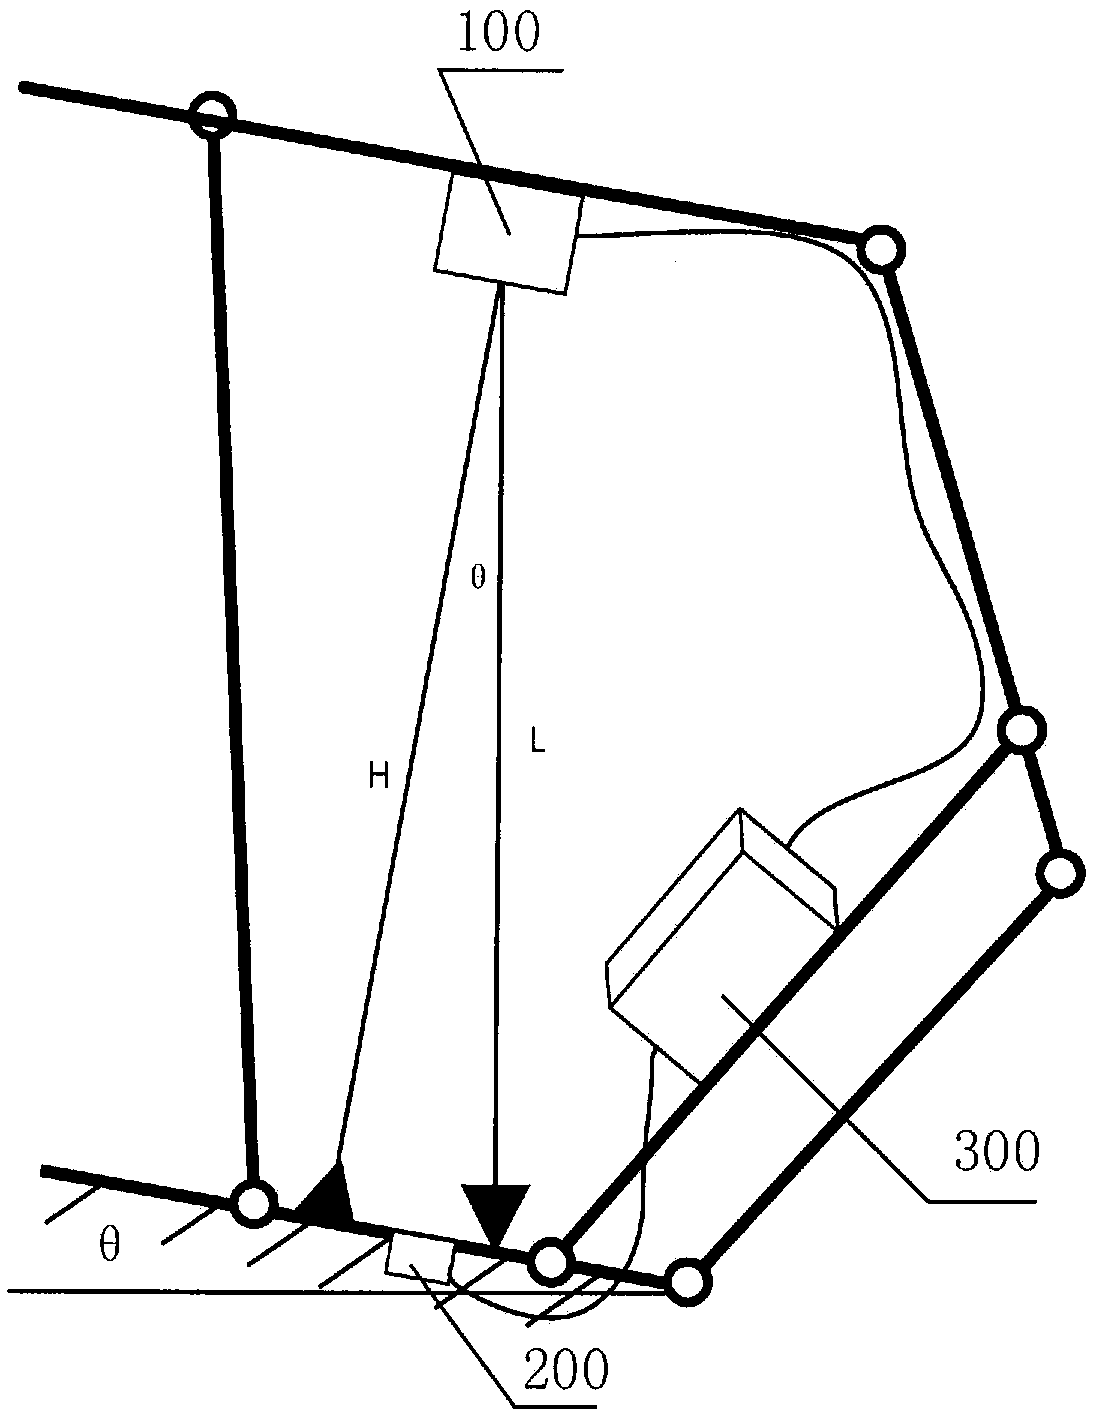 Height measuring device and method of hydraulic bracket